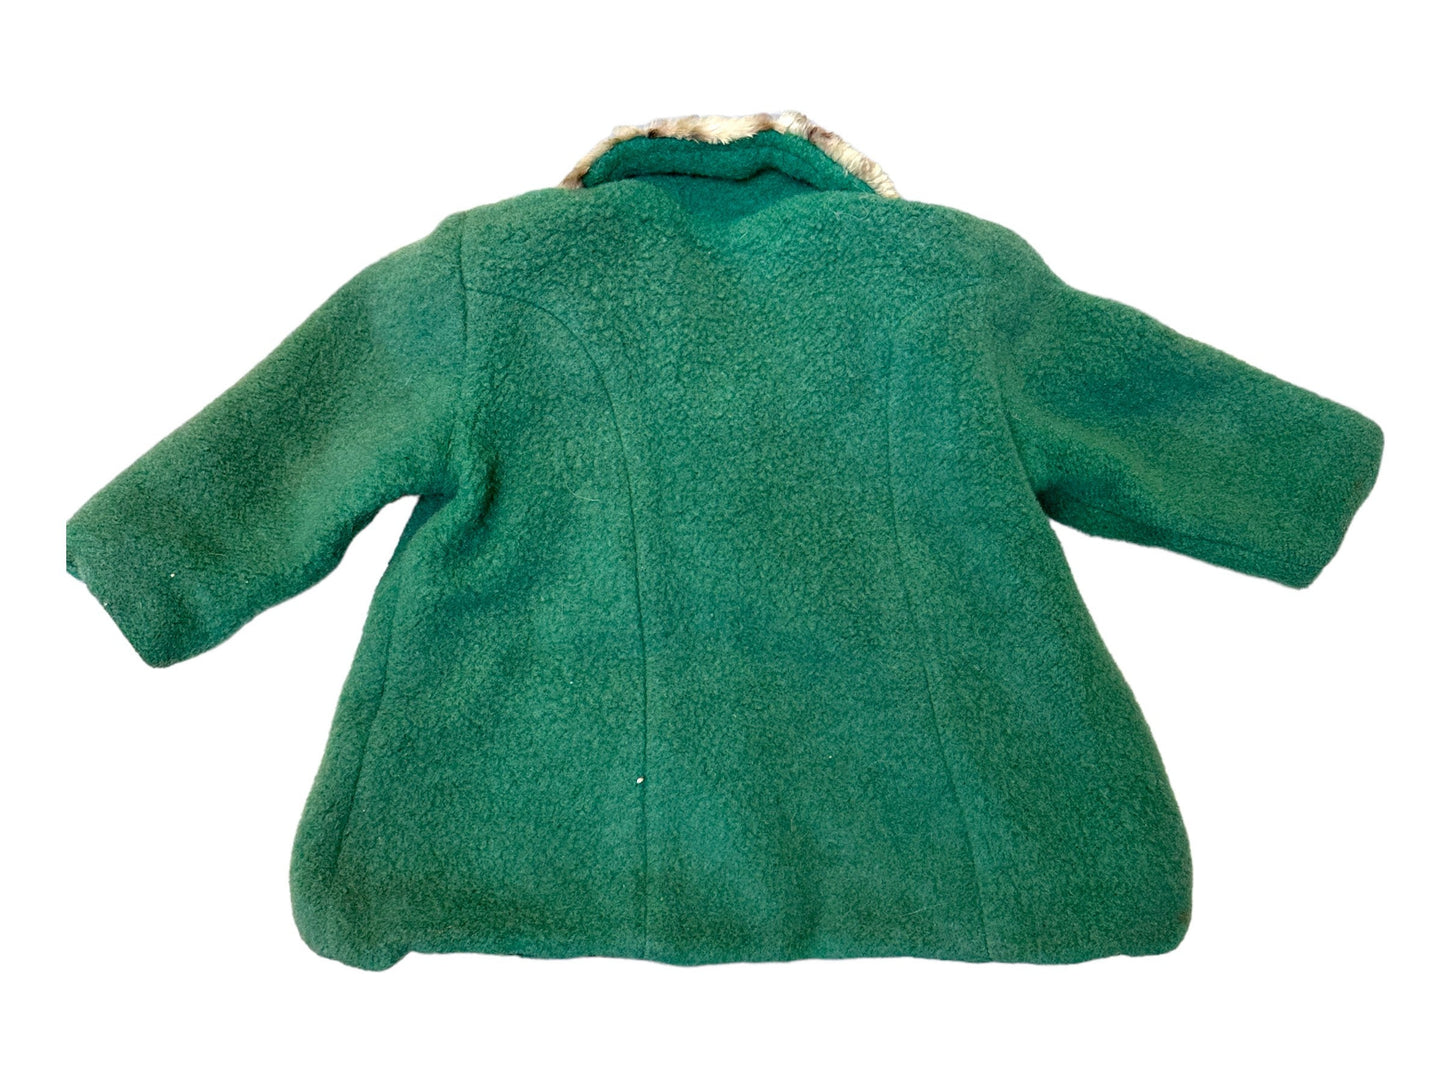 1950s wool jacket and overalls with bonnet Size approx 24 mos